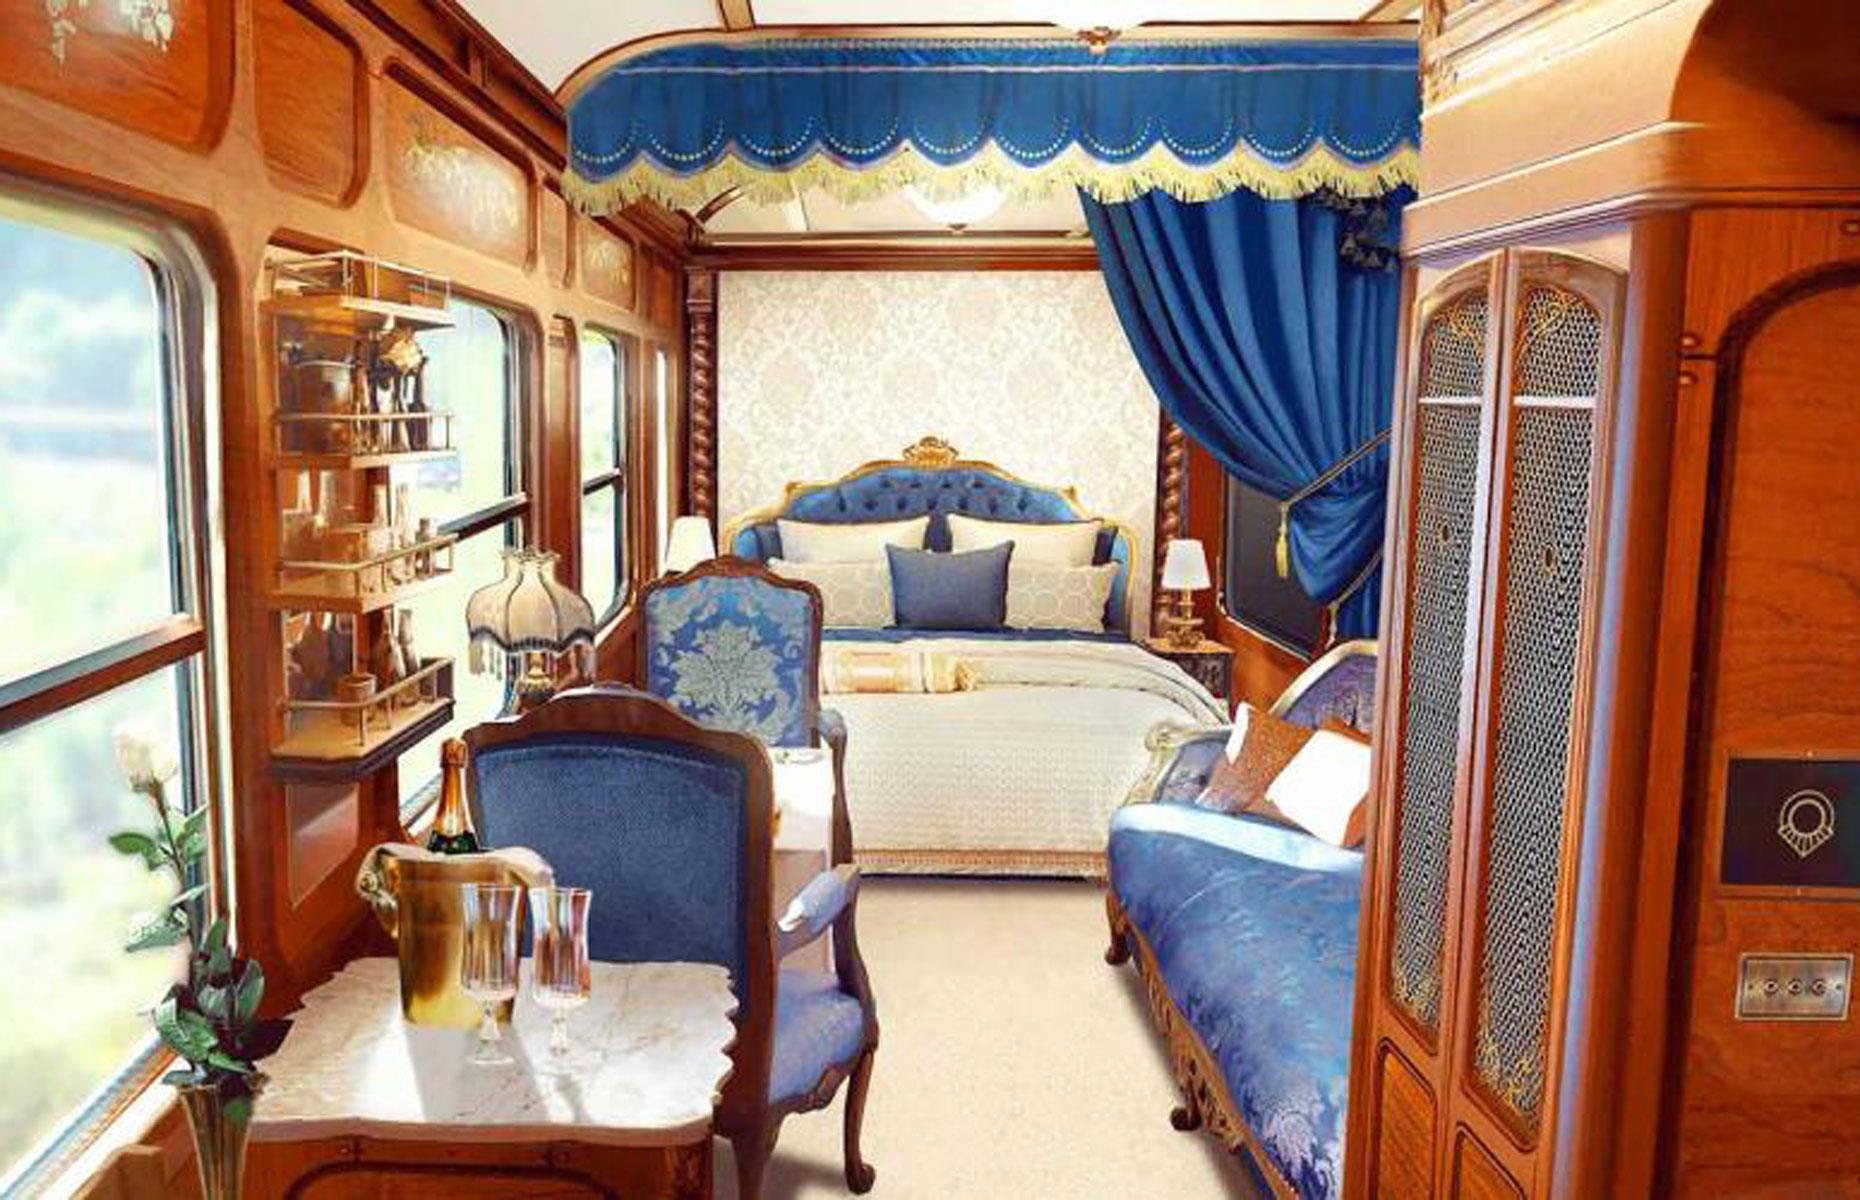 <p>The train comprises 18 cabins named after French historical figures, along with a sumptuous bar and restaurant cars, where guests can indulge in fine champagne and exquisite cuisine designed by three Michelin-starred chef Alexandre Couillon, who's featured on the hit Netflix show <em>Chef's Table</em>.</p>  <p>The Adjoining Suites are Le Grand Tour's more extravagant cabins. They each span an extra-generous 269 square feet (25 square meters) and include a double bedroom, lounge, and private bathroom. A dedicated butler caters to guests every whim. Prices start from $17,816 (£14,018) per person, which works out at $3,563 (£1,865) per night.</p>